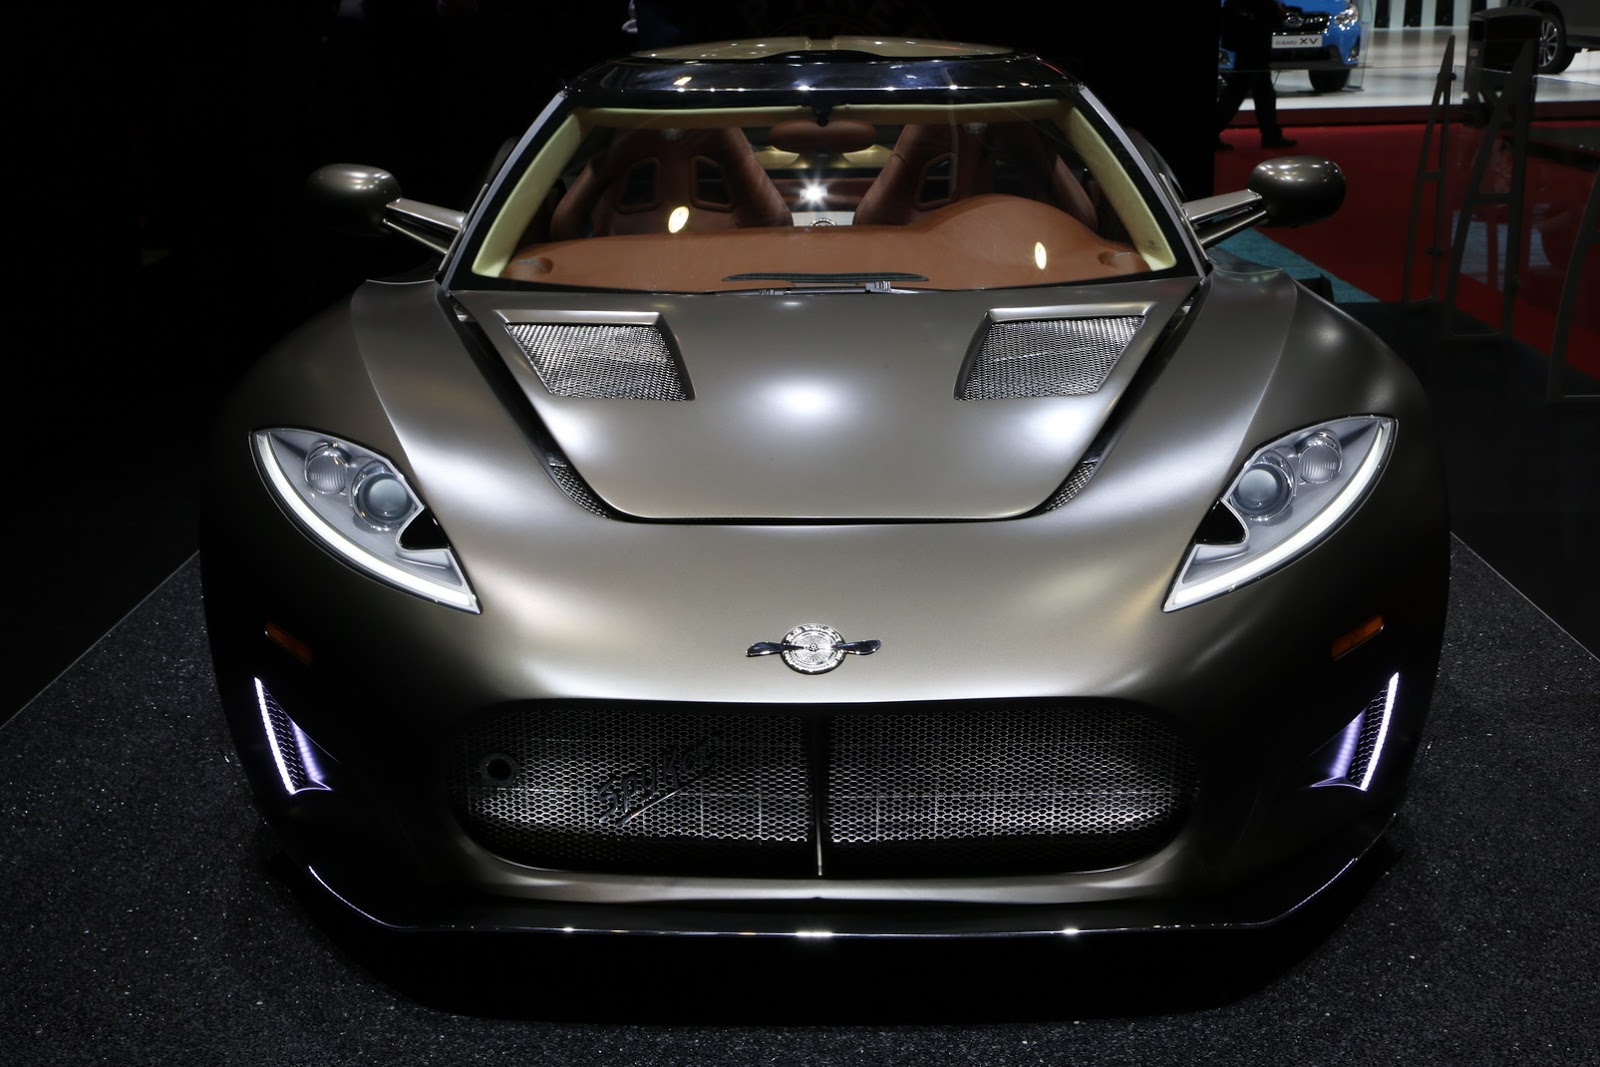 Spyker Reportedly Goes Bust After Partnership Never Materializes ...